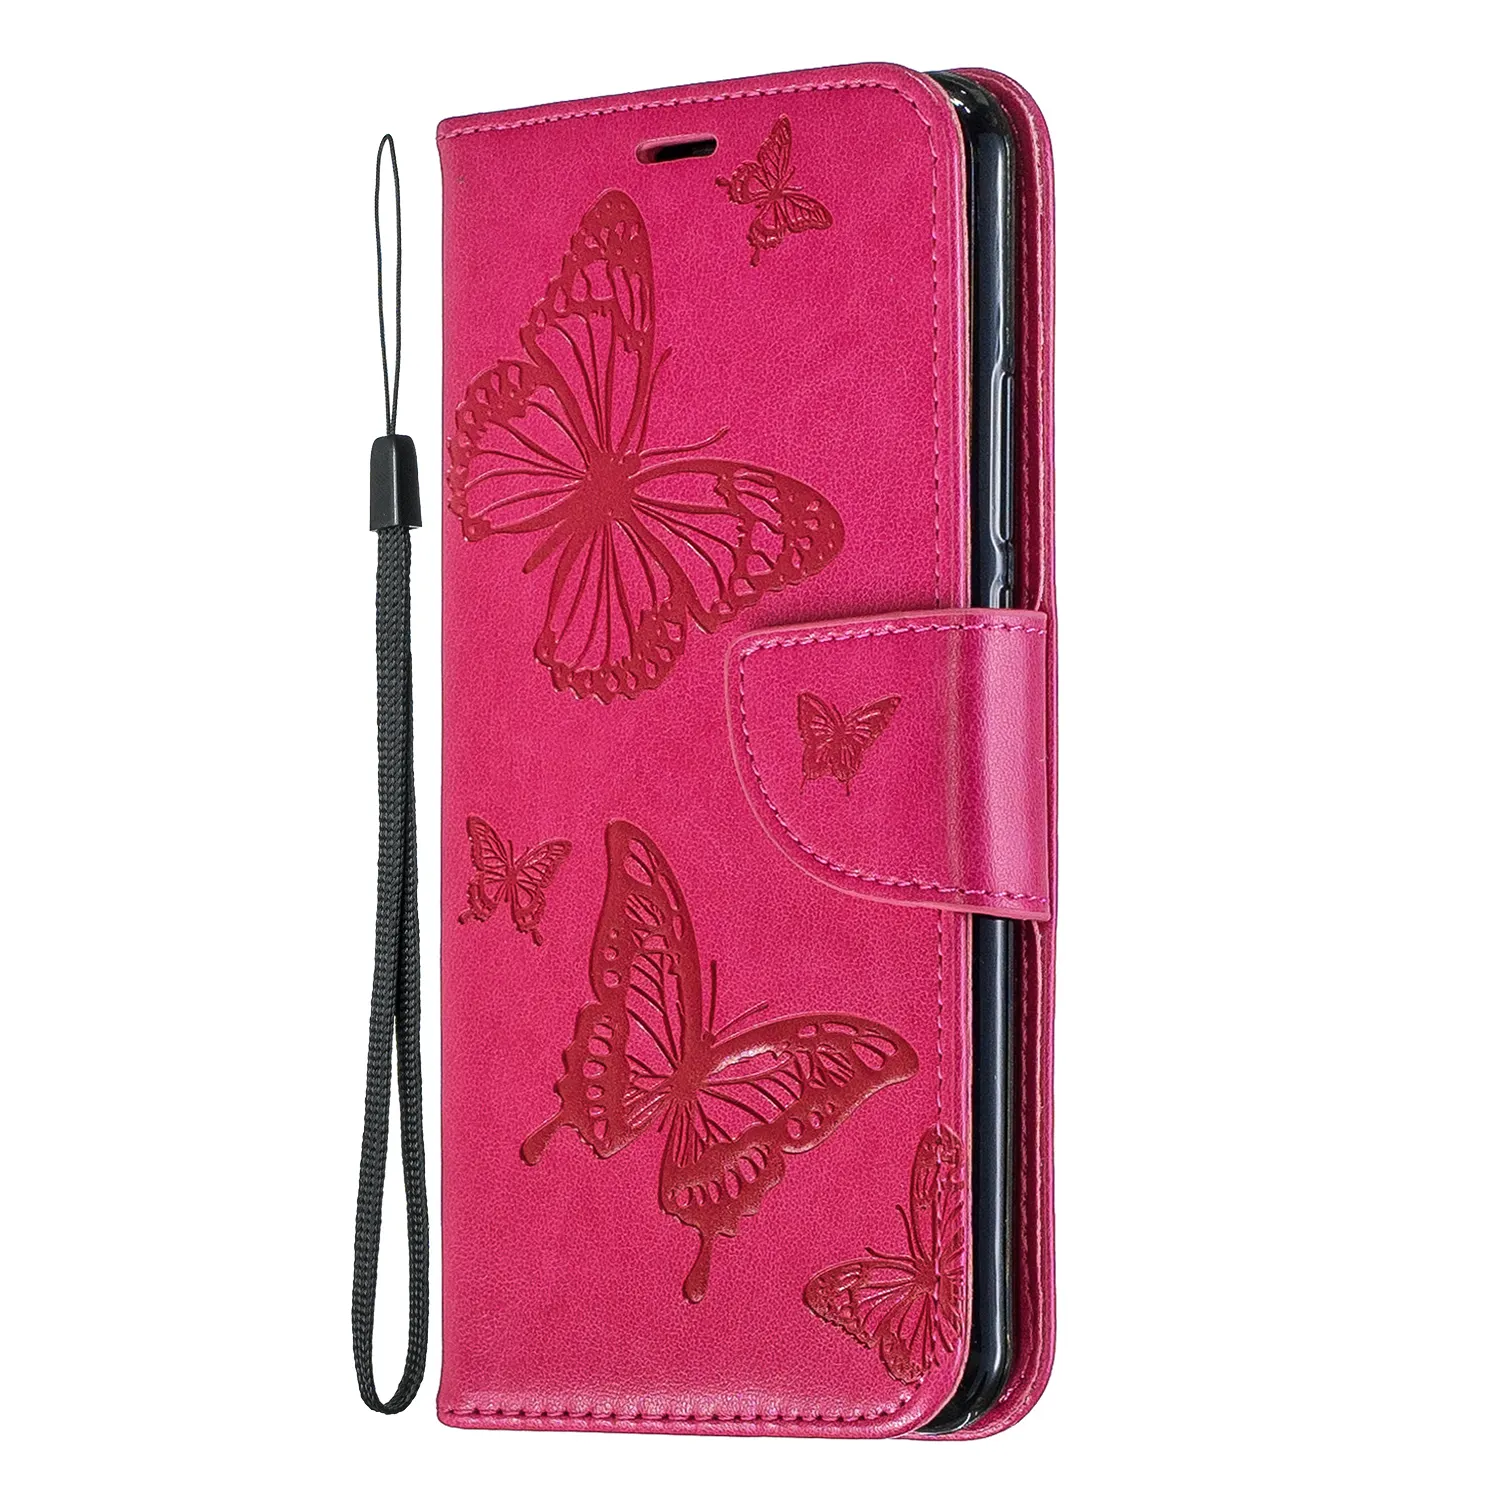 Cell Phone Cover Cute Butterfly Anti-shock PU Leather Book Flip Case For Huawei P20 Pro lite NOVA 3i Y5 Y6 Y7 2017